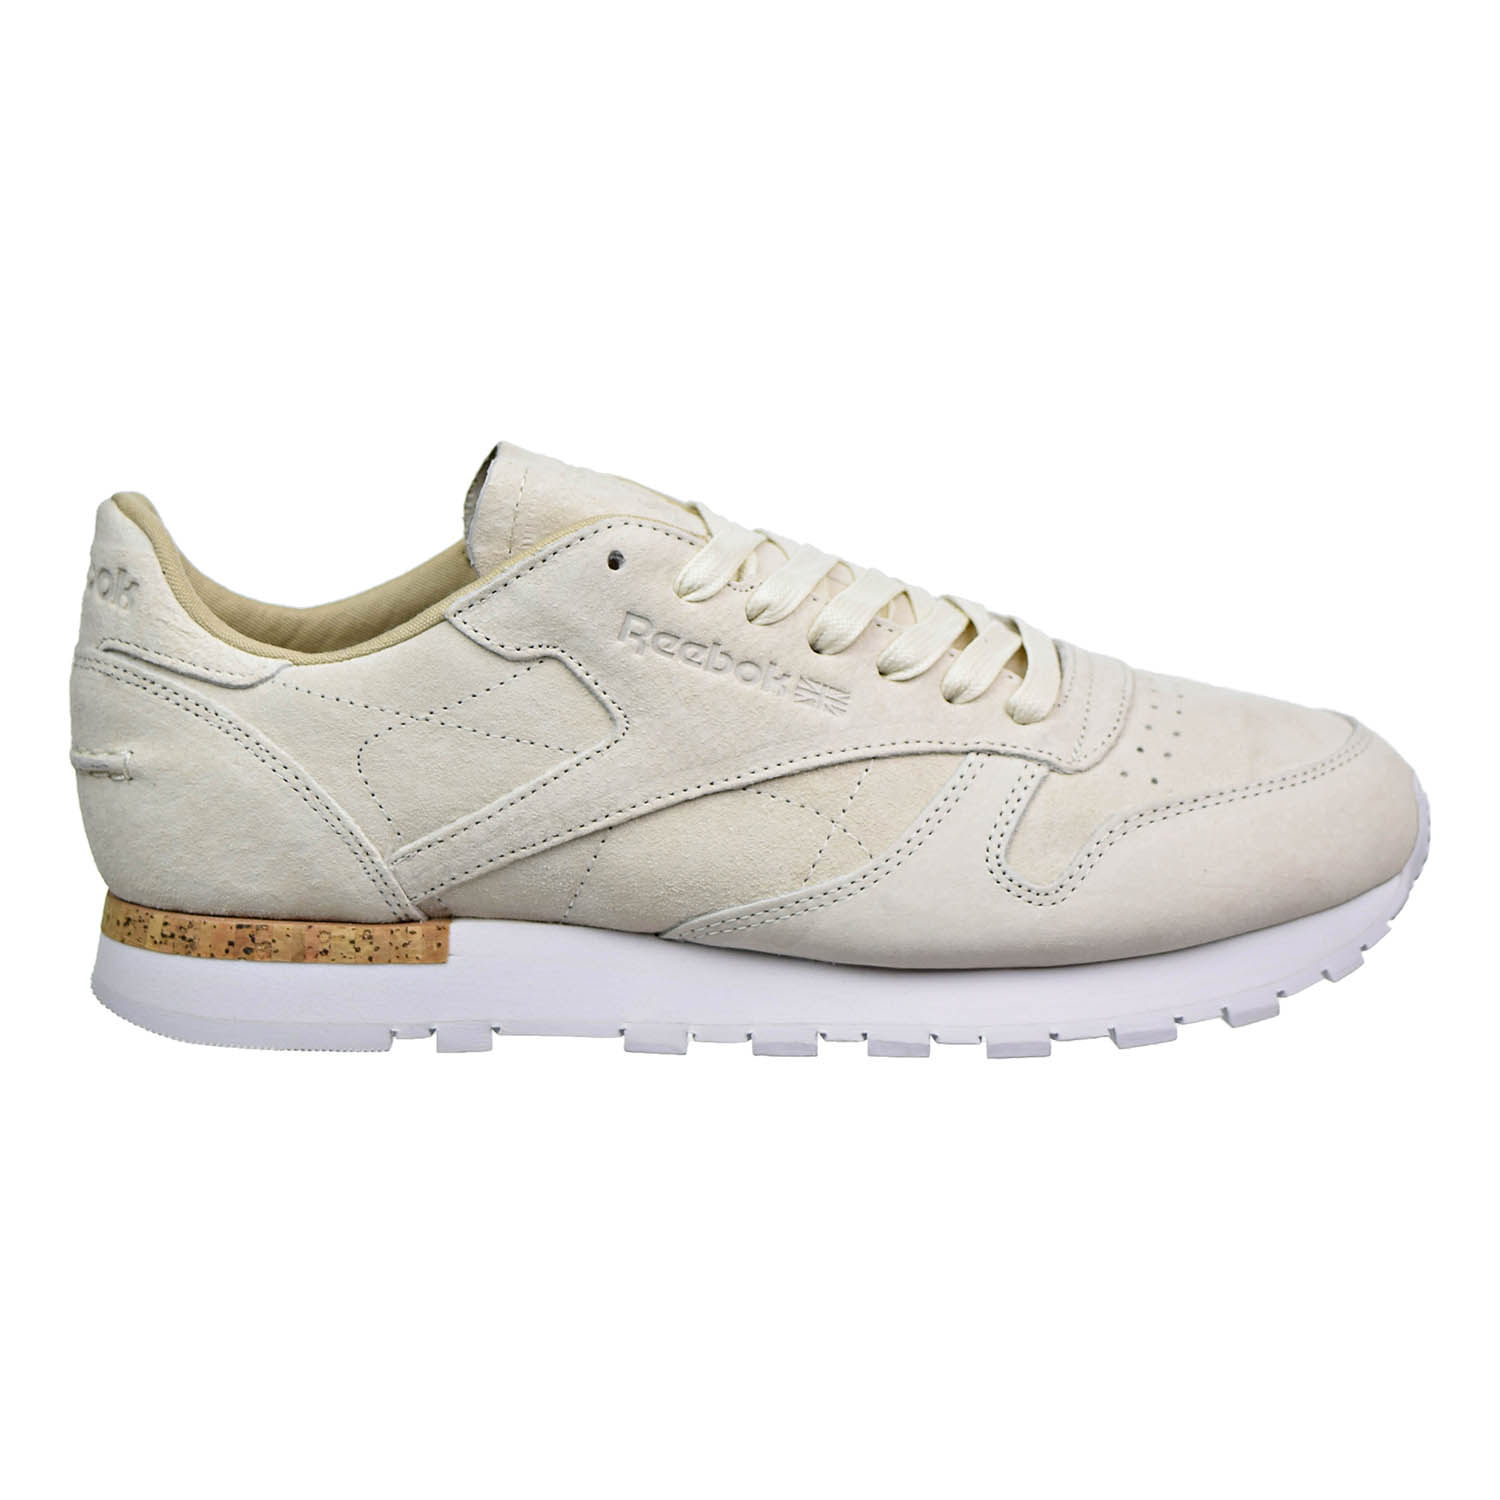 Reebok Classic Leather'LST' Mens shoes Classic White-Paperwhite BD1902 |  eBay